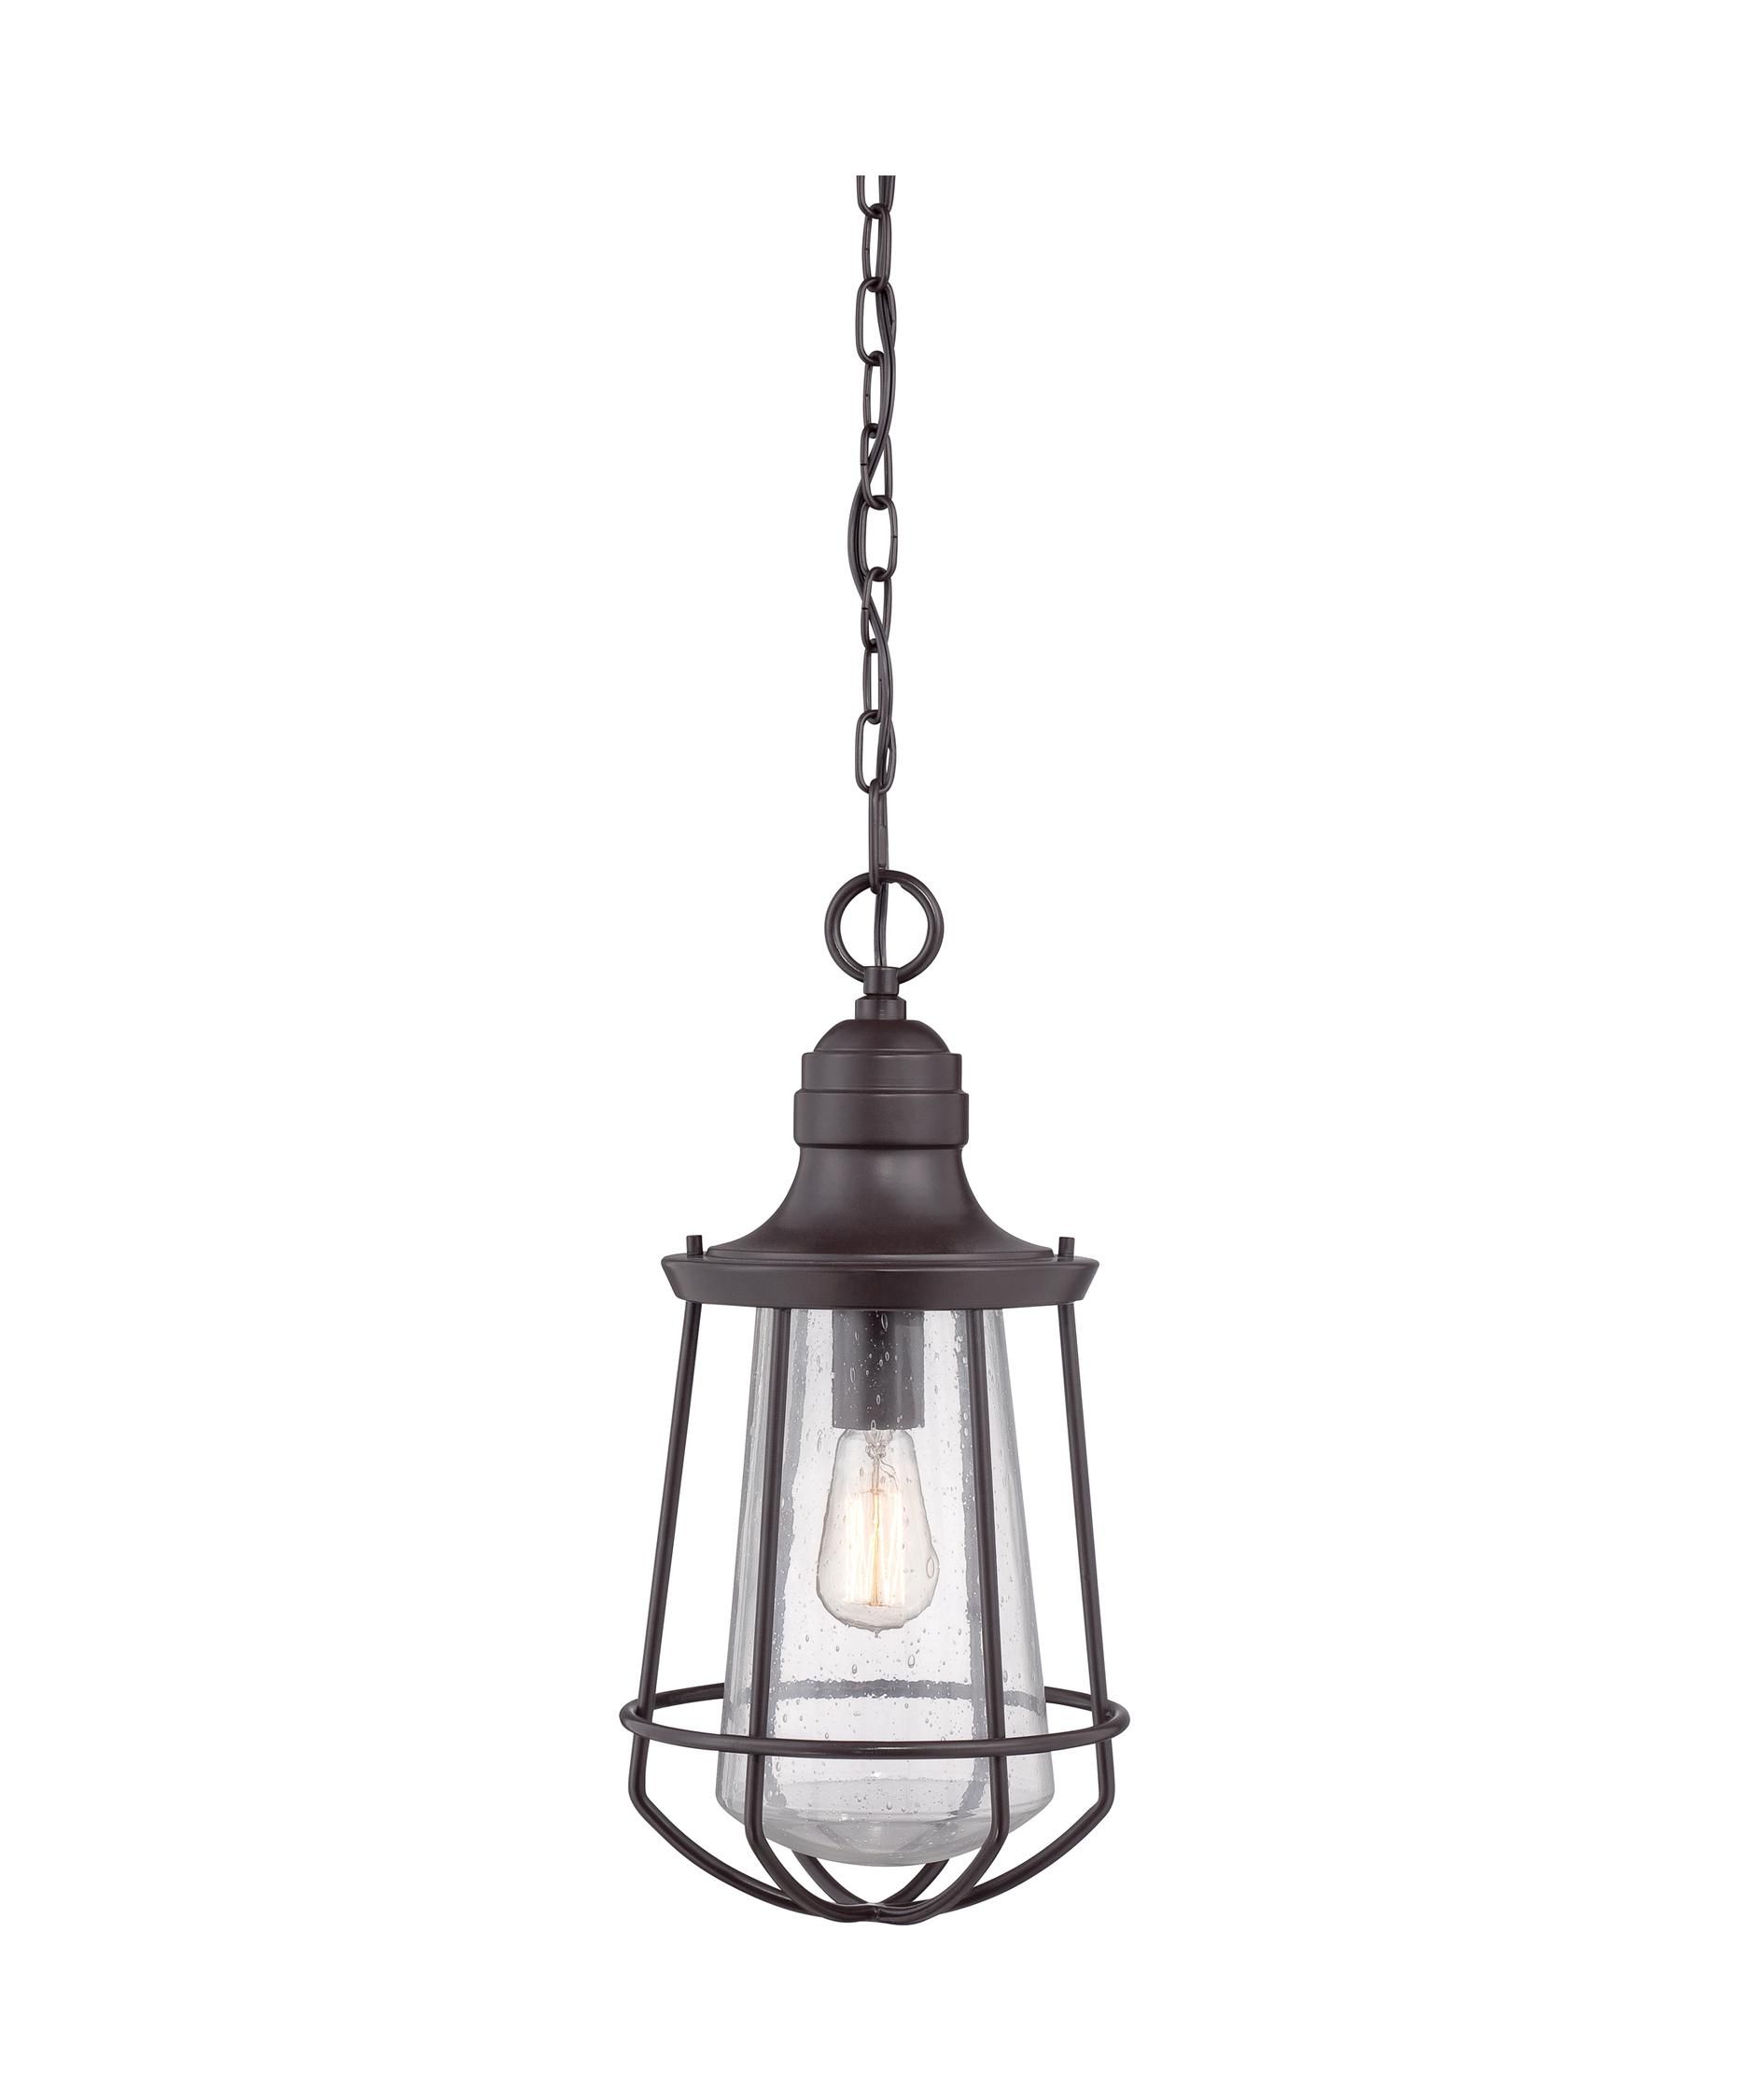 Quoizel Mre1909 Marine 10 Inch Wide 1 Light Outdoor Hanging Lantern Pertaining To Quoizel Outdoor Hanging Lights (View 2 of 15)